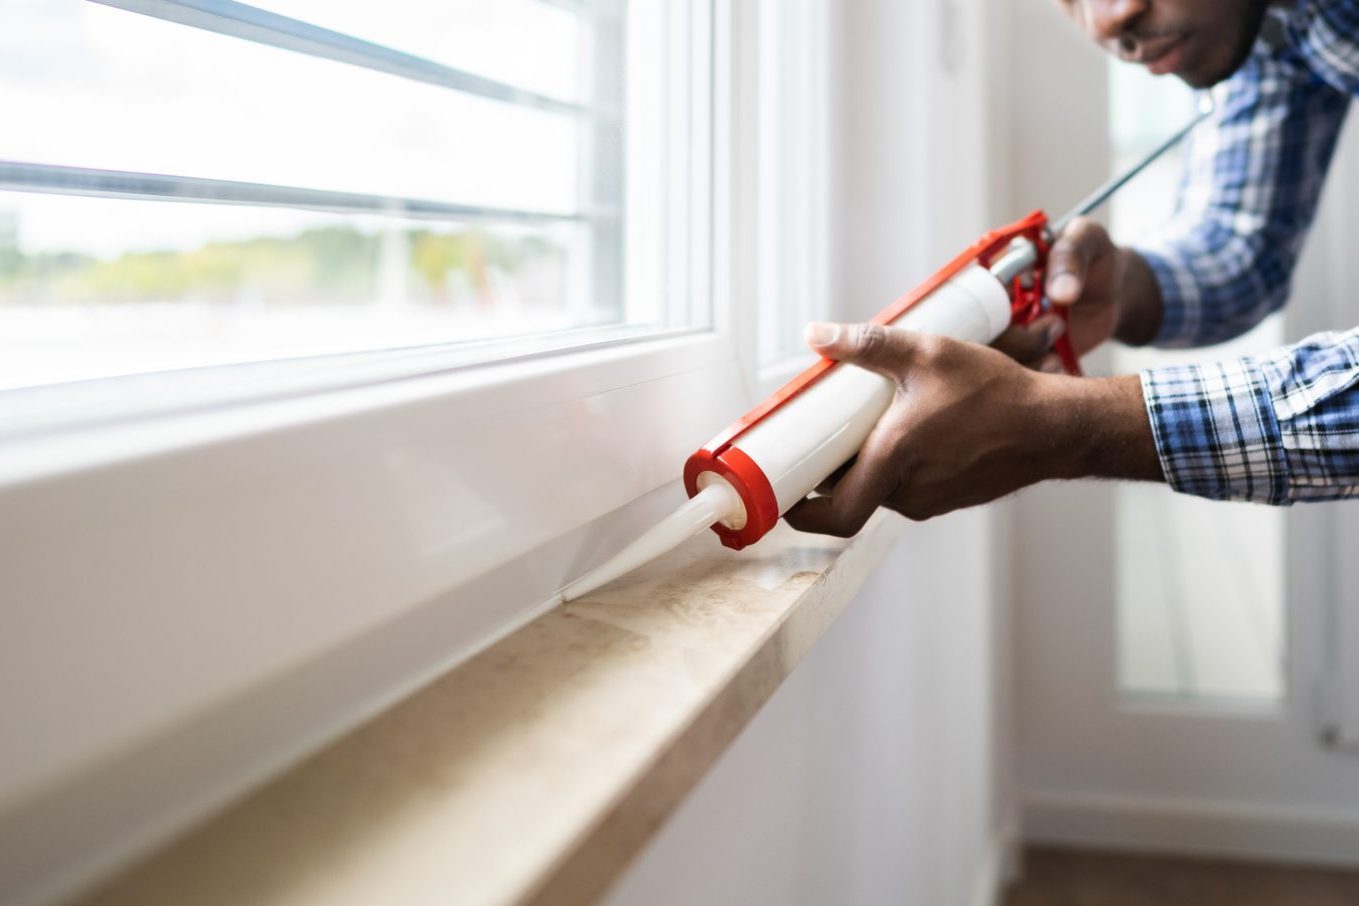 7 Most Common Caulking Mistakes That Could Derail Your Project